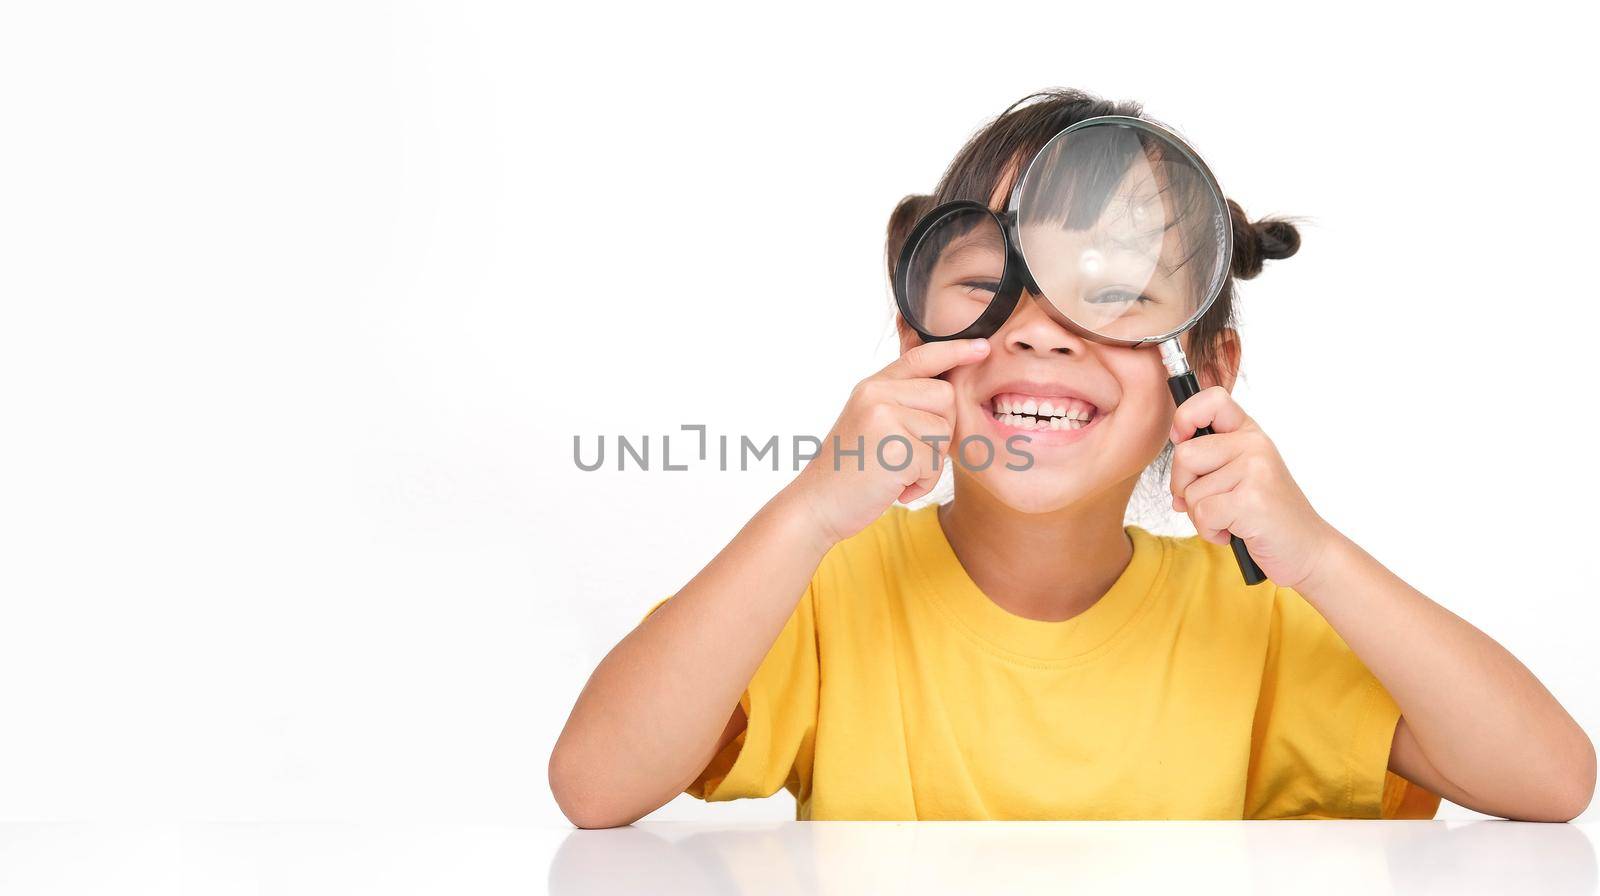 Cute dark haired girl smiling happily holding two magnifying glasses on her eyes isolated on a white background and looking at the camera.